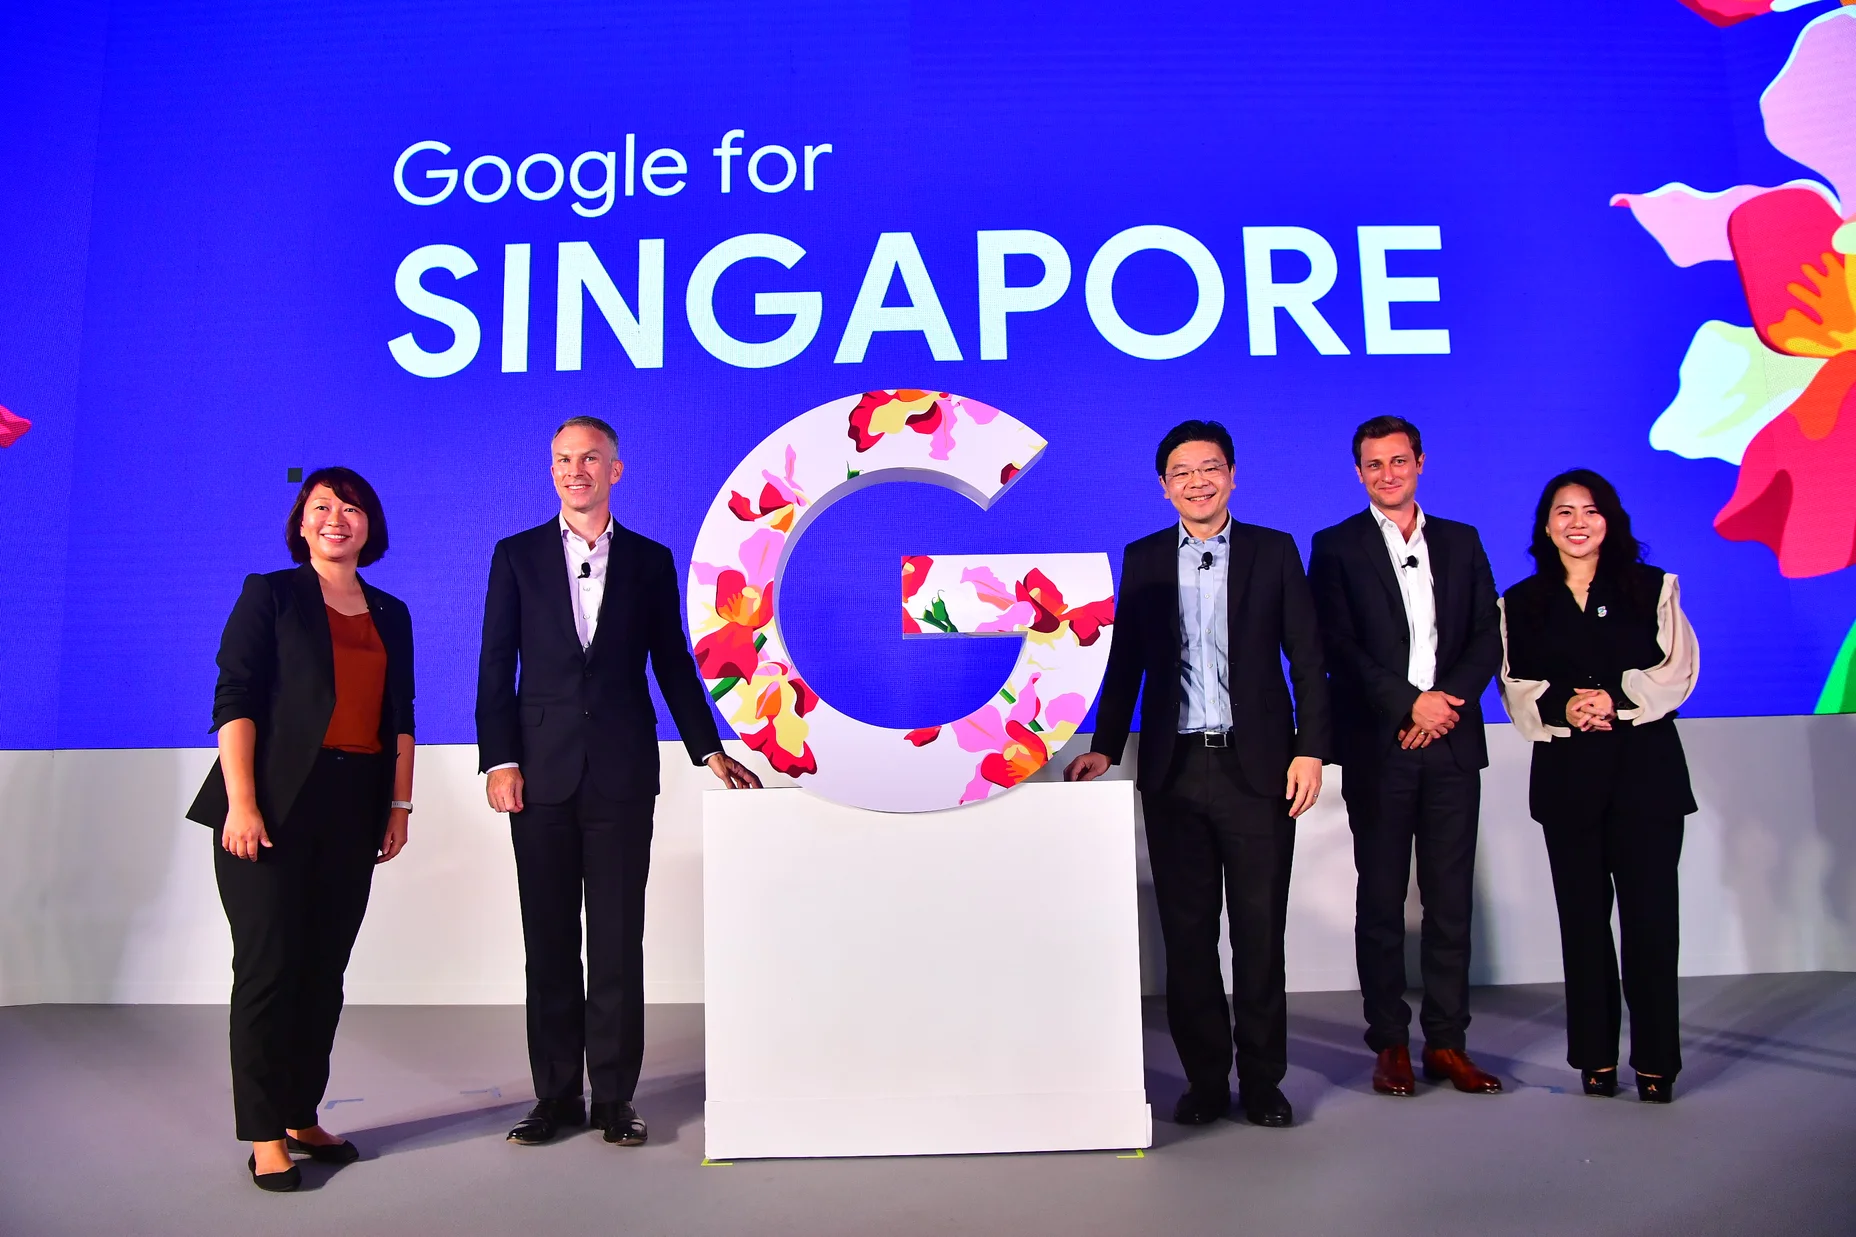 Five people stand on stage next to a pedestal with the letter G. The wall behind them reads: Google for Singapore.